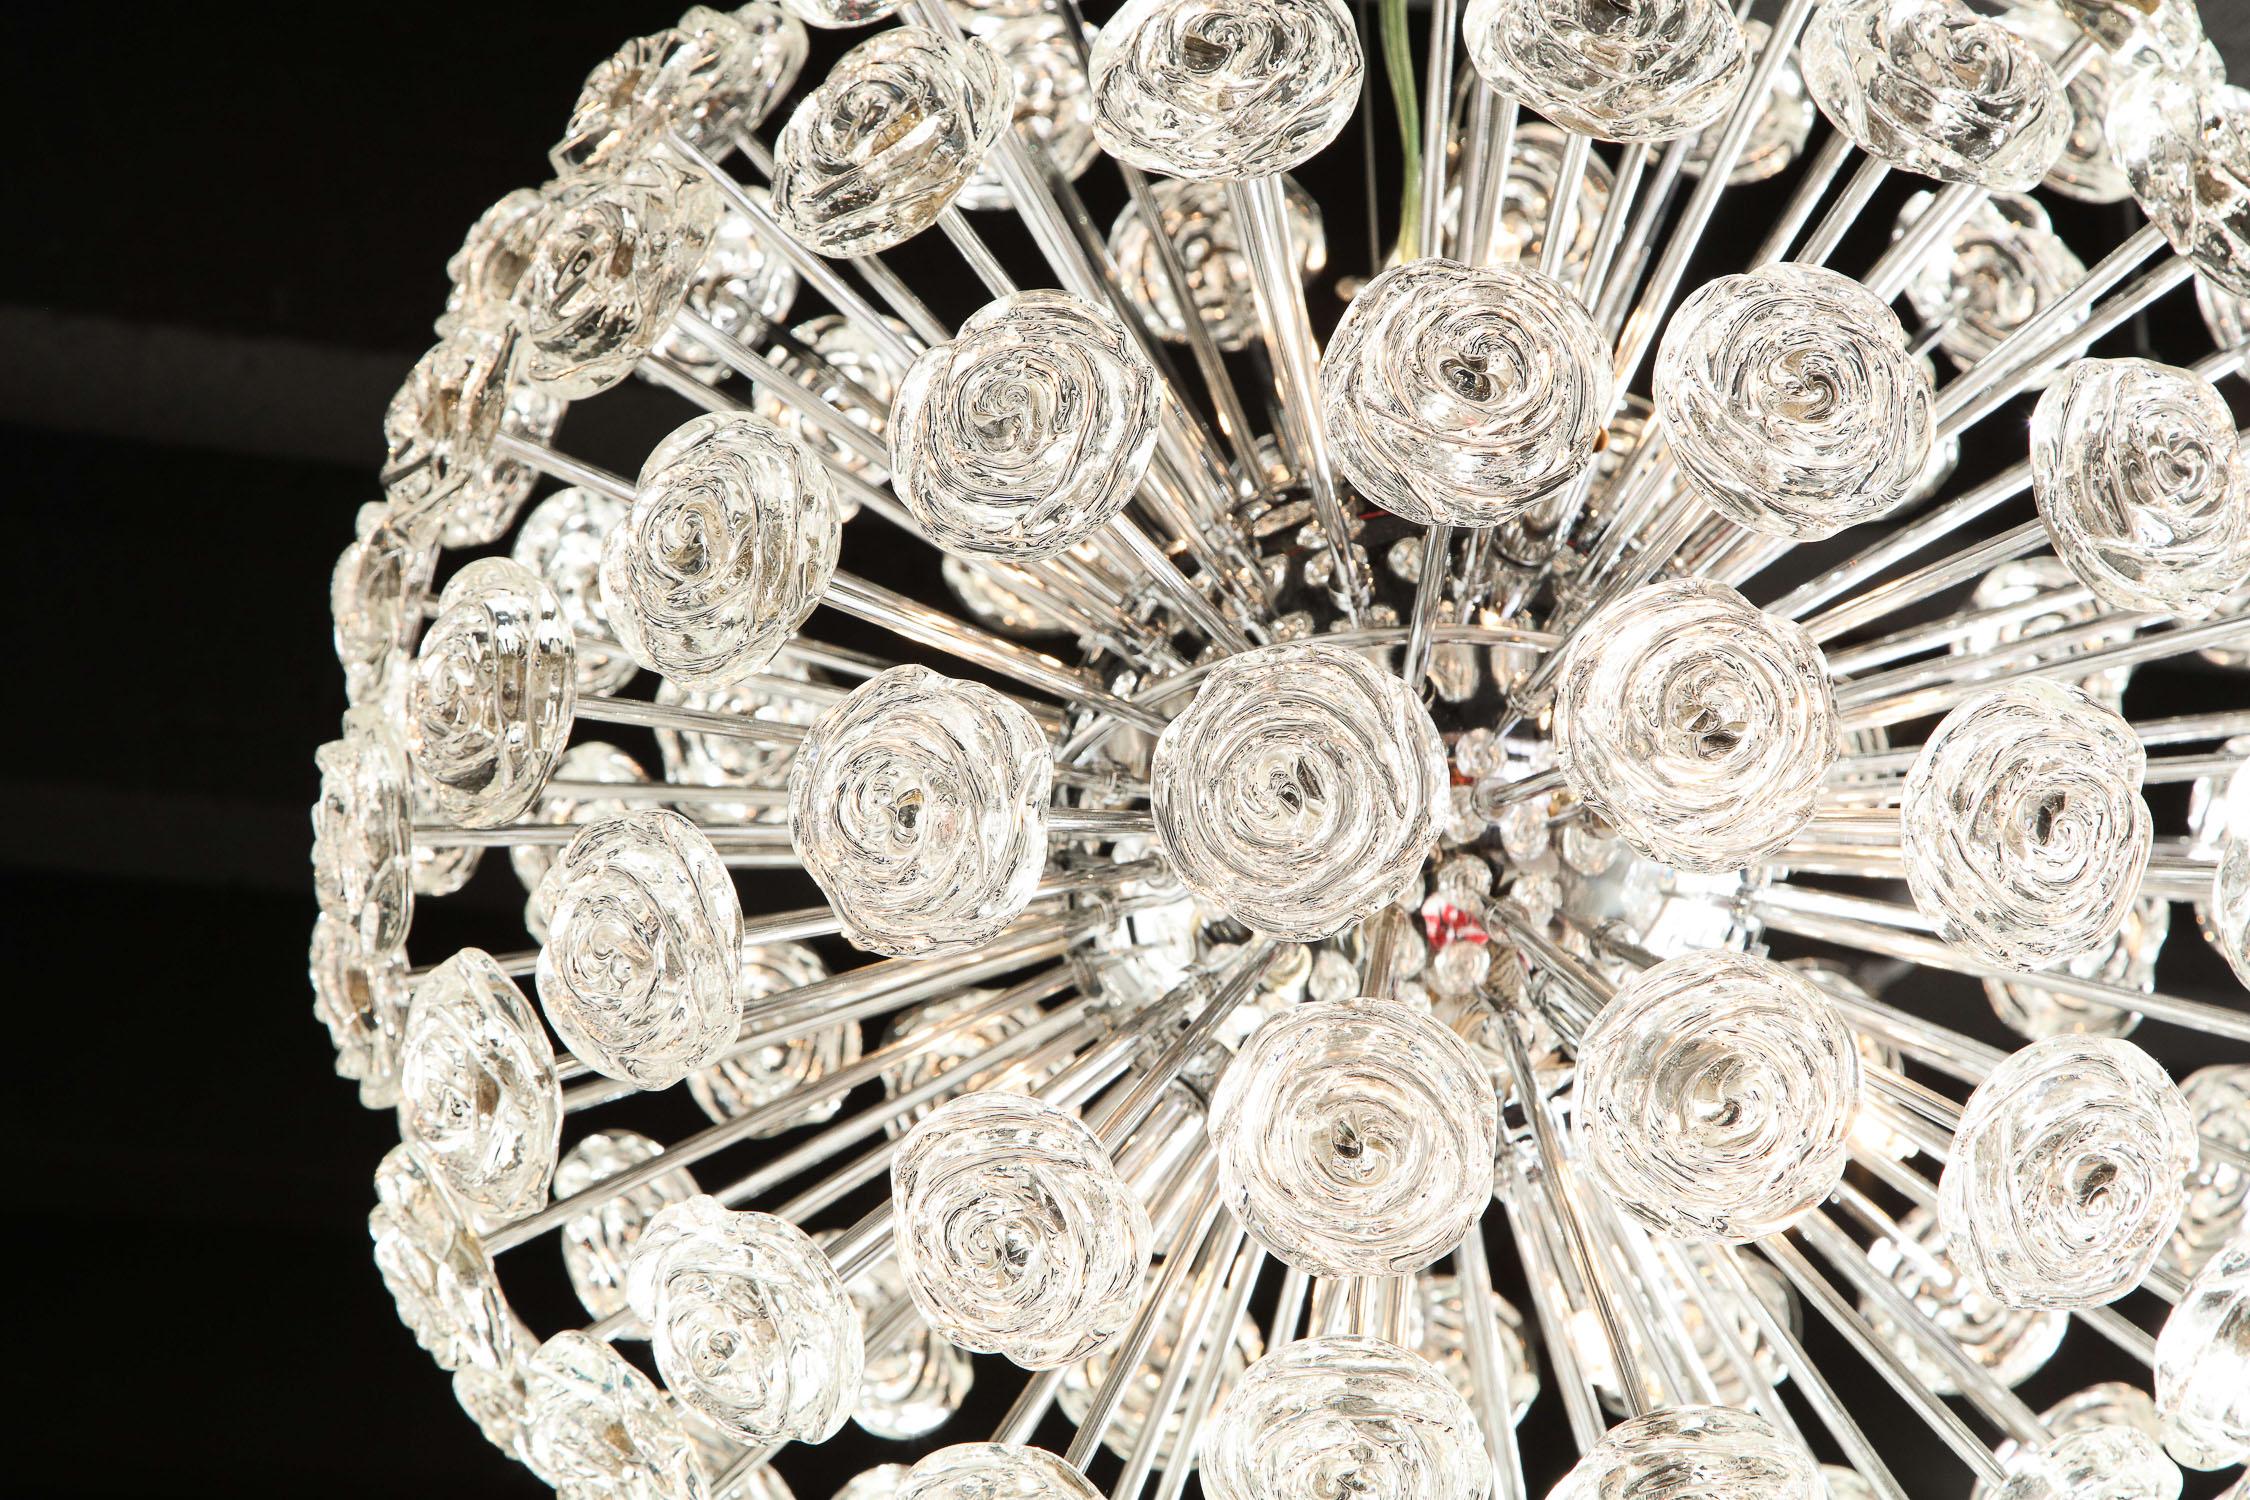 Contemporary Chandelier with Glass Roses, Midcentury Design, Italy, Large Chrome Sphere For Sale